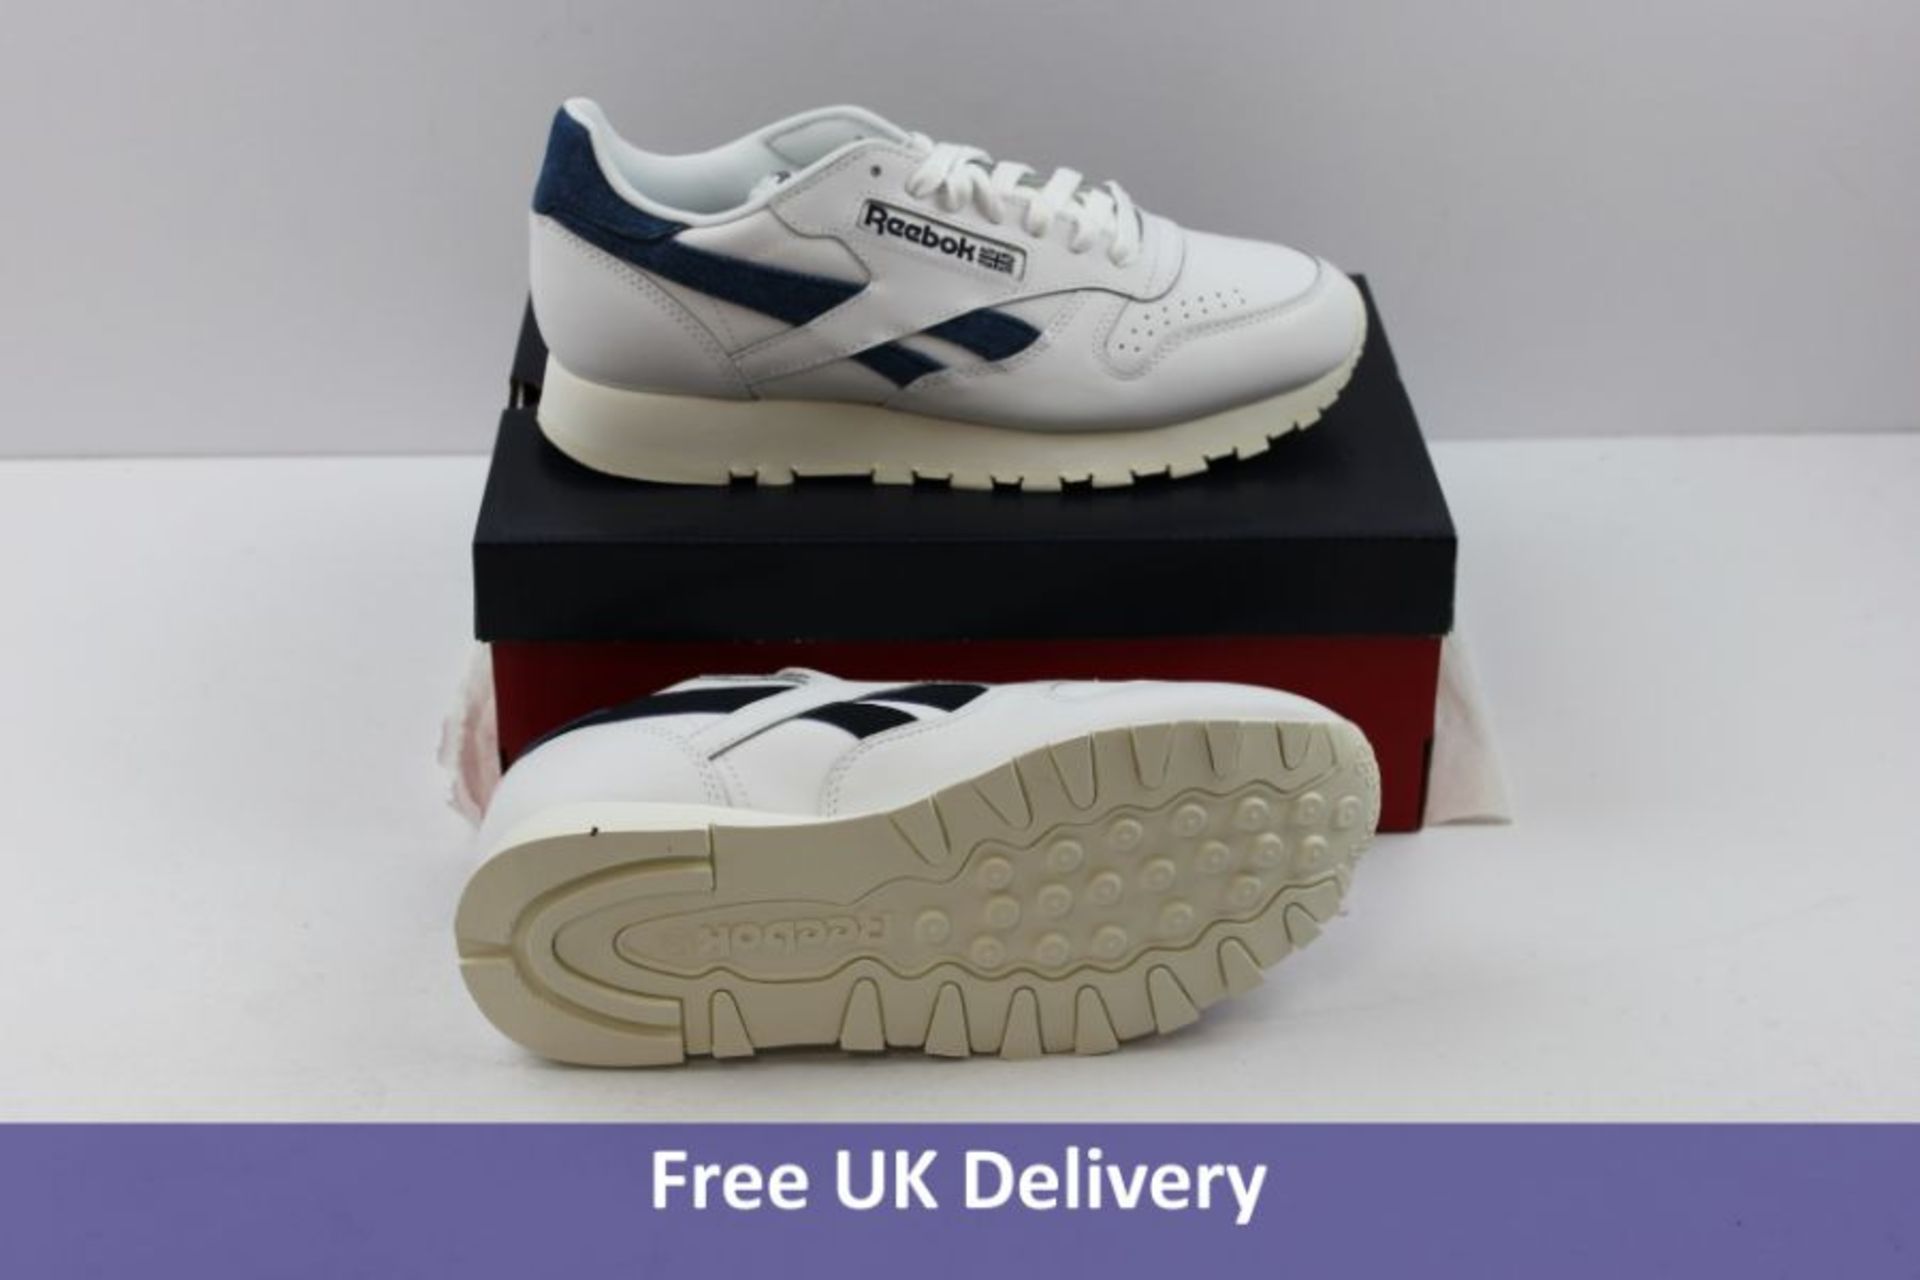 Reebok Men's Classic Trainers, White and Blue, UK 6